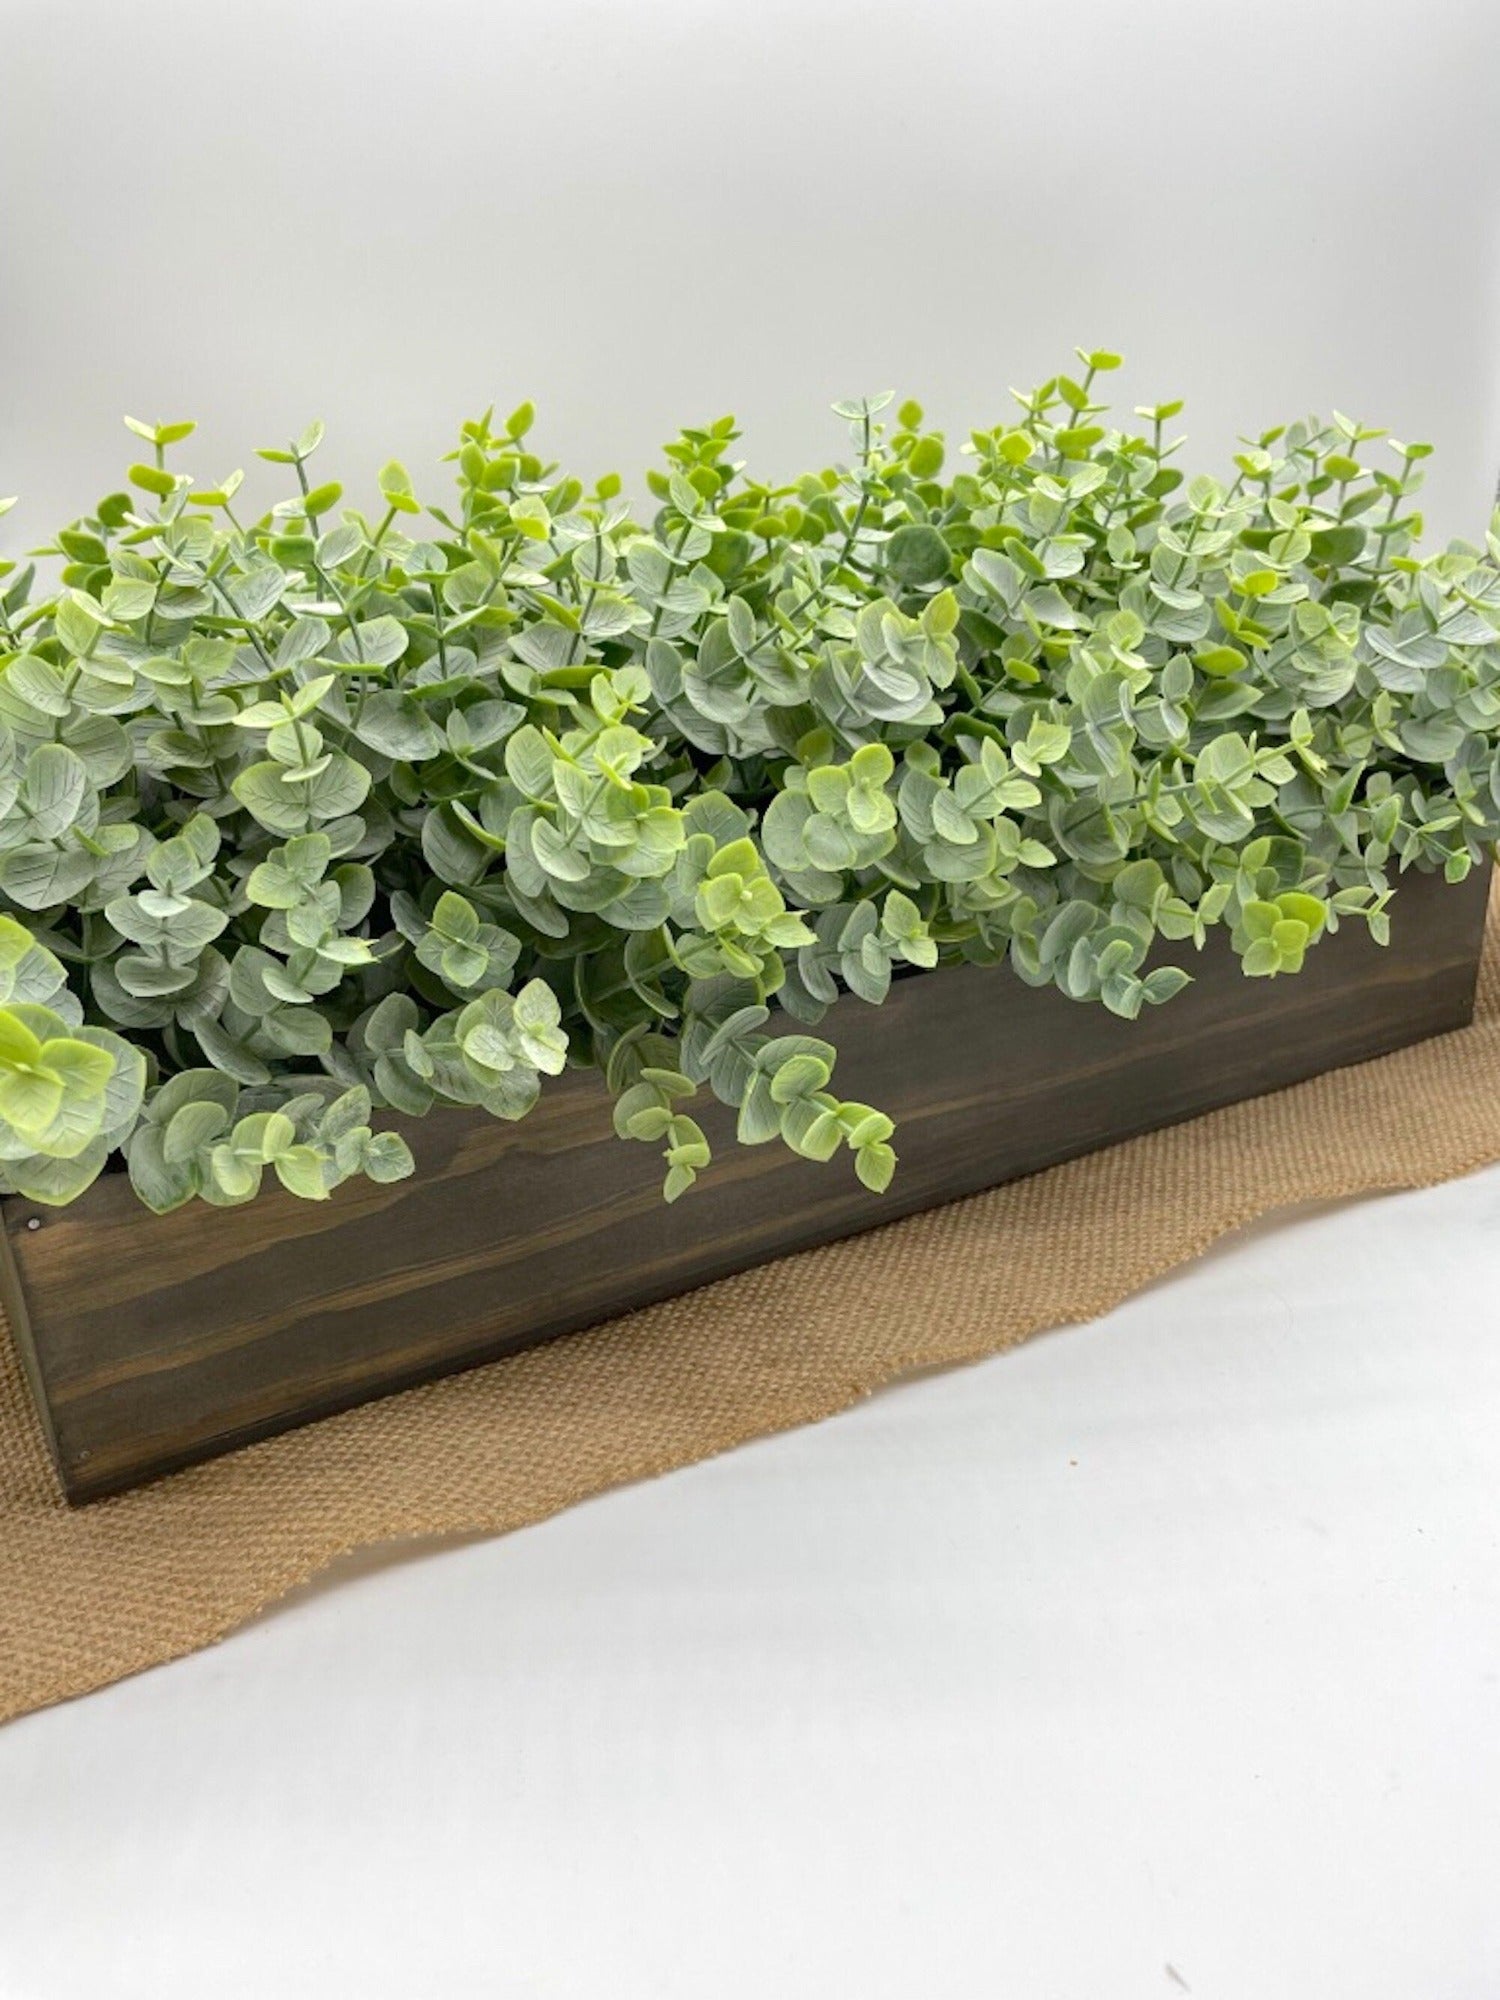 Eucalyptus Centerpiece for Dining Table, Silk Plants in Rustic Barnwood Planter for Mantel